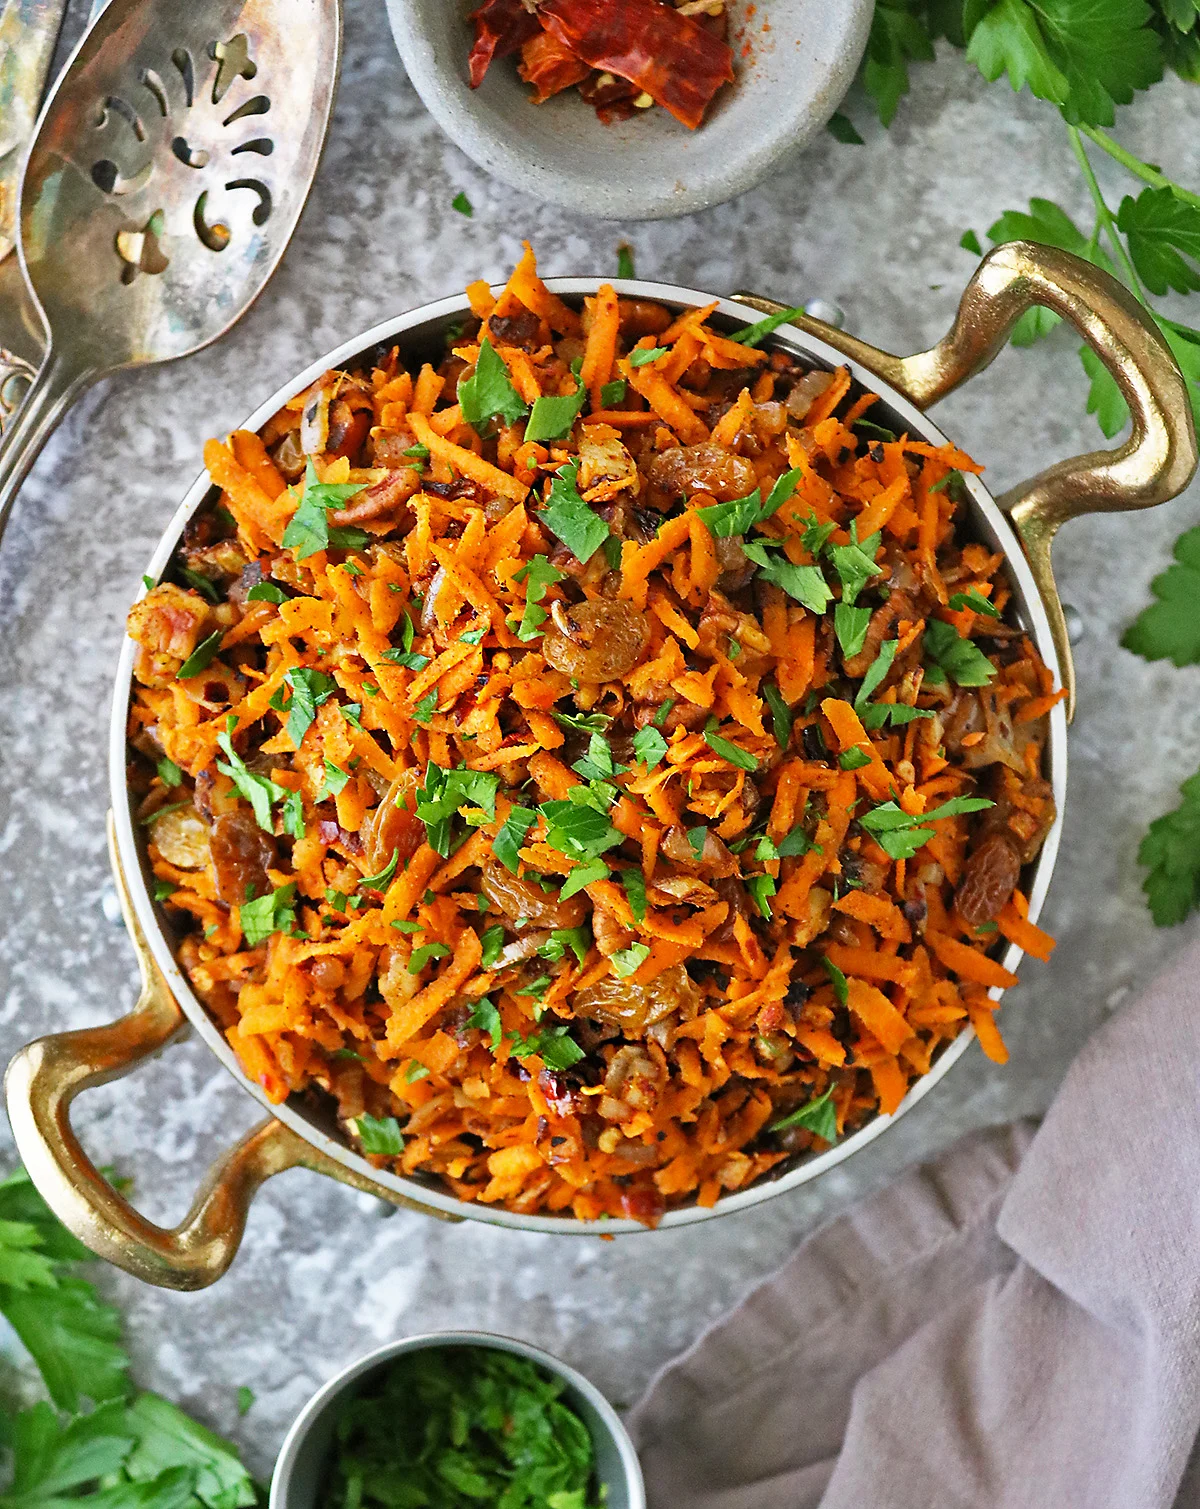 Easy healthy carrot raisin salad in a gold skillet with parsley and chili flakes around.